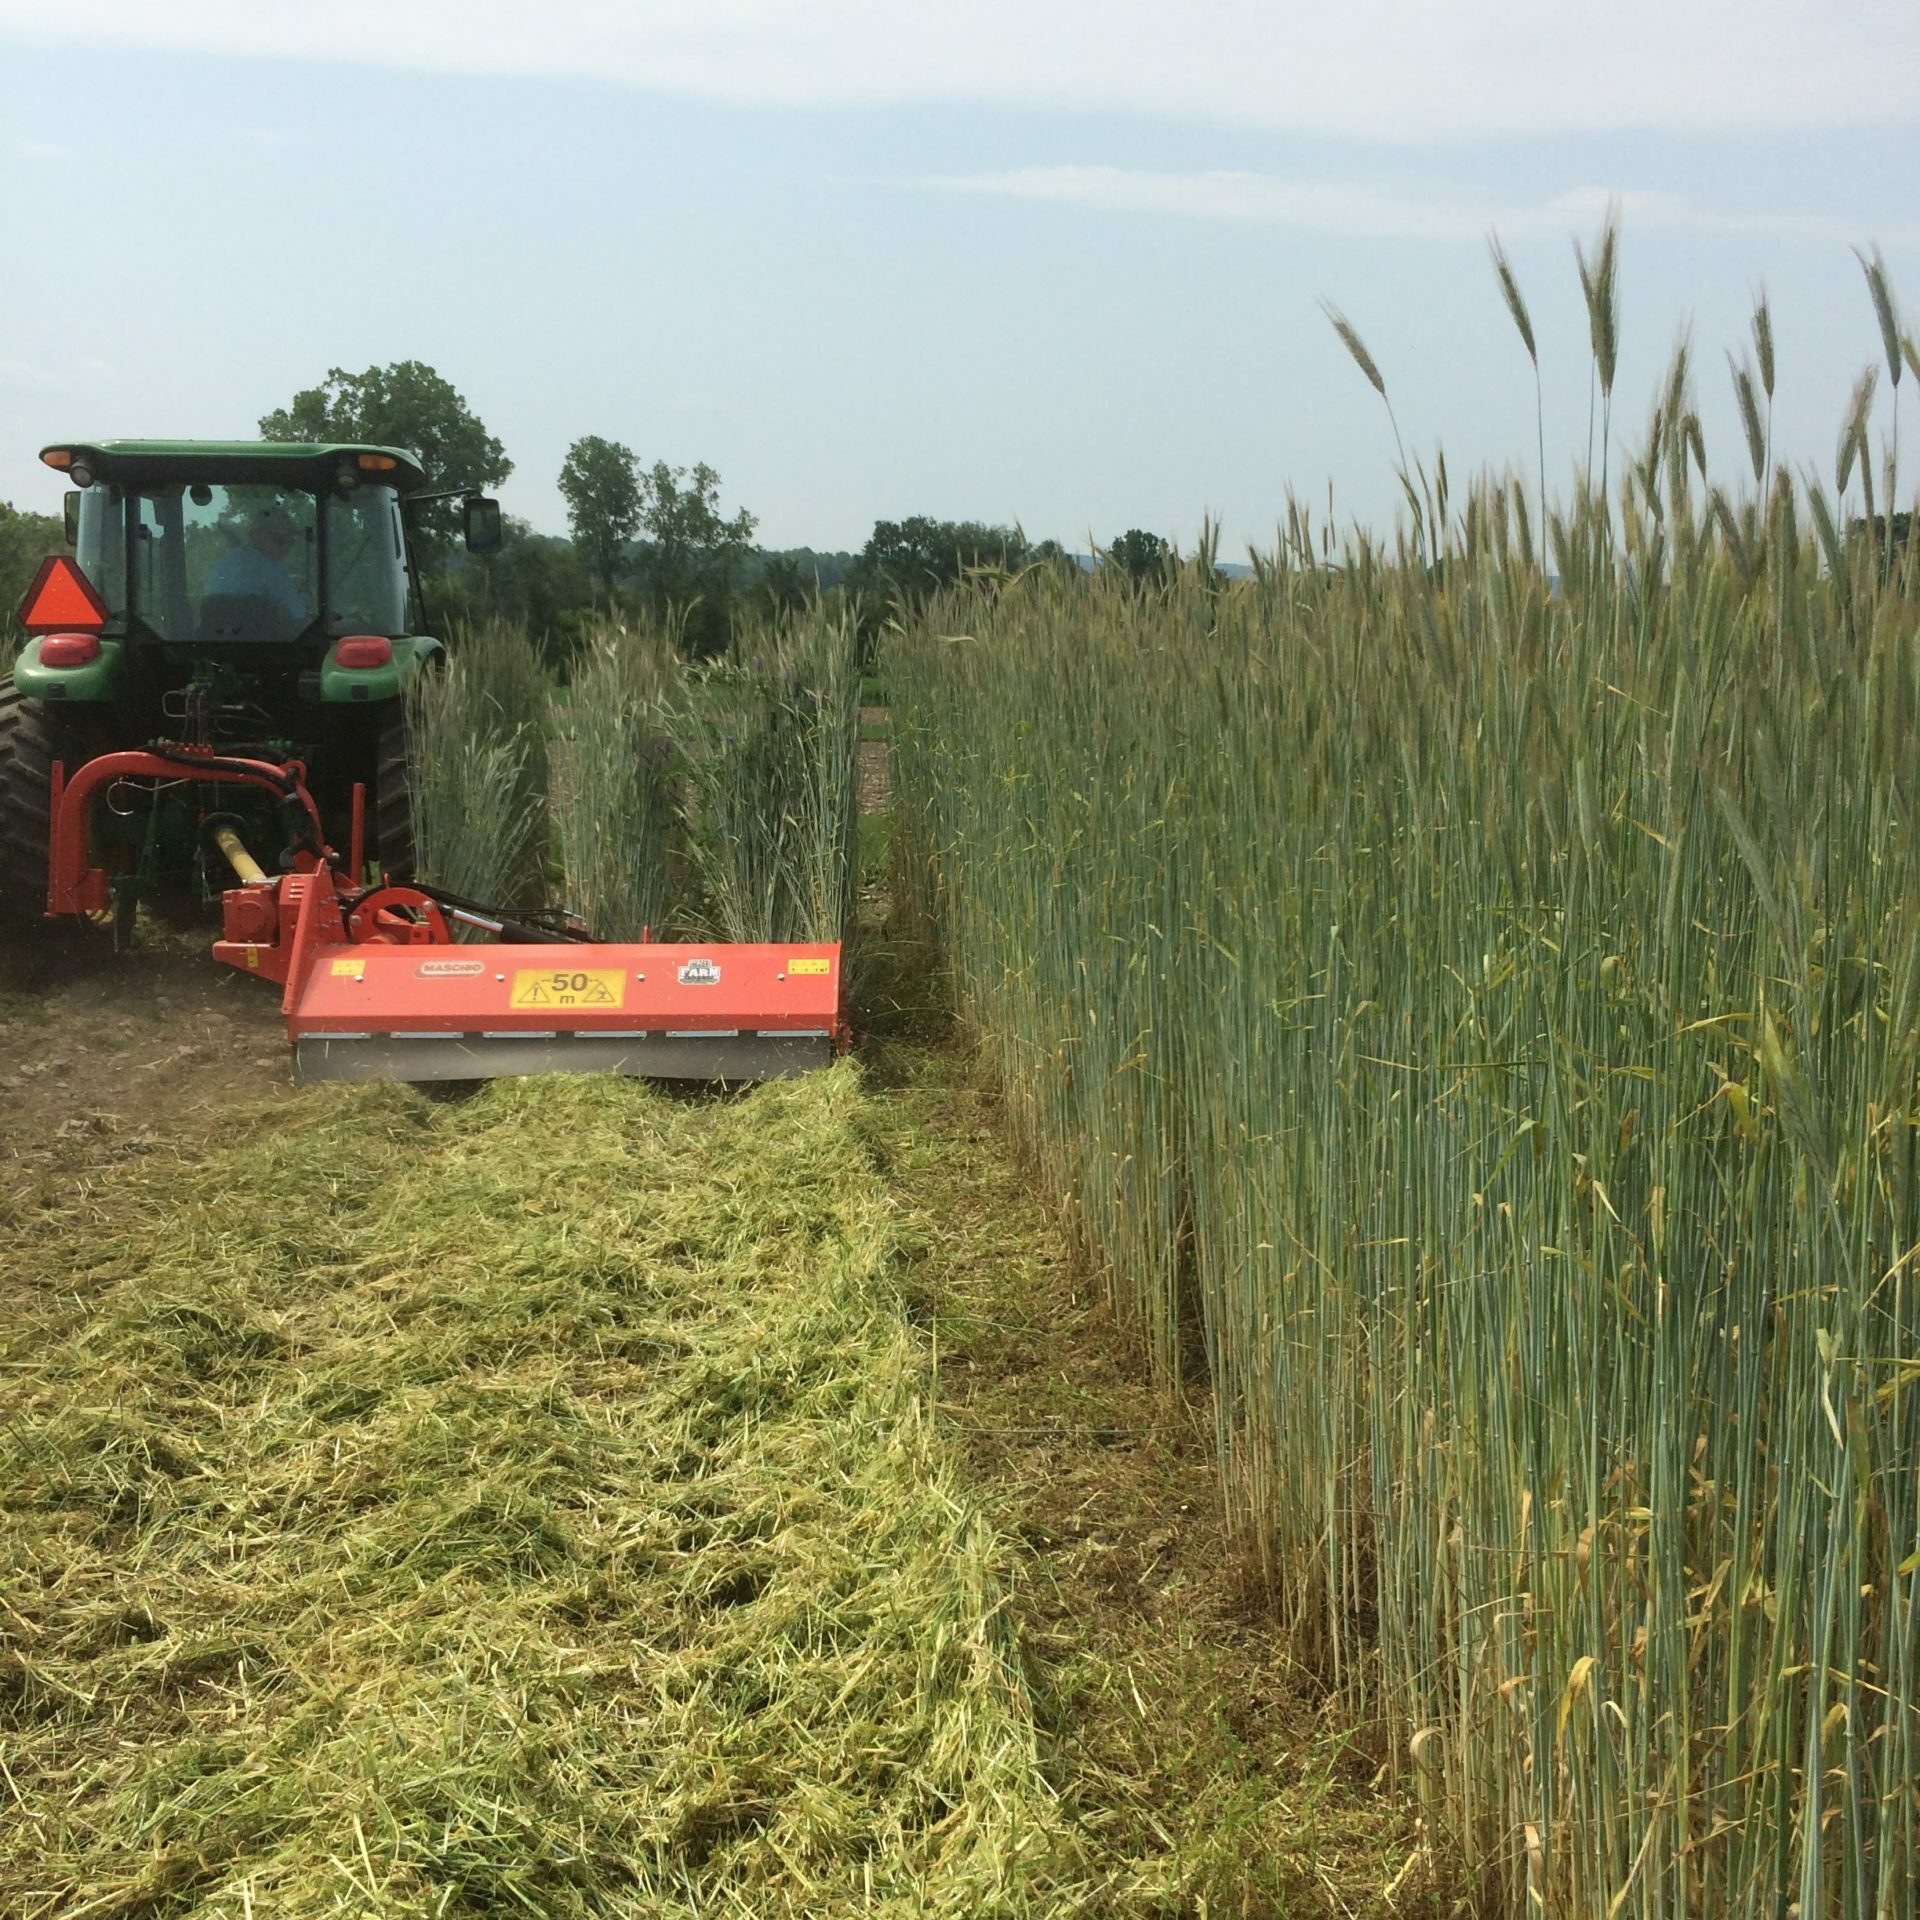 Flail mowing cereal rye at anthesis can effectively terminate the crop. While cereal rye has high biomass potential, it can create difficult soil conditions for the following crop. It's high C:N ratio can tie up soil nitrogen and in dry years it can deplete soil moisture.